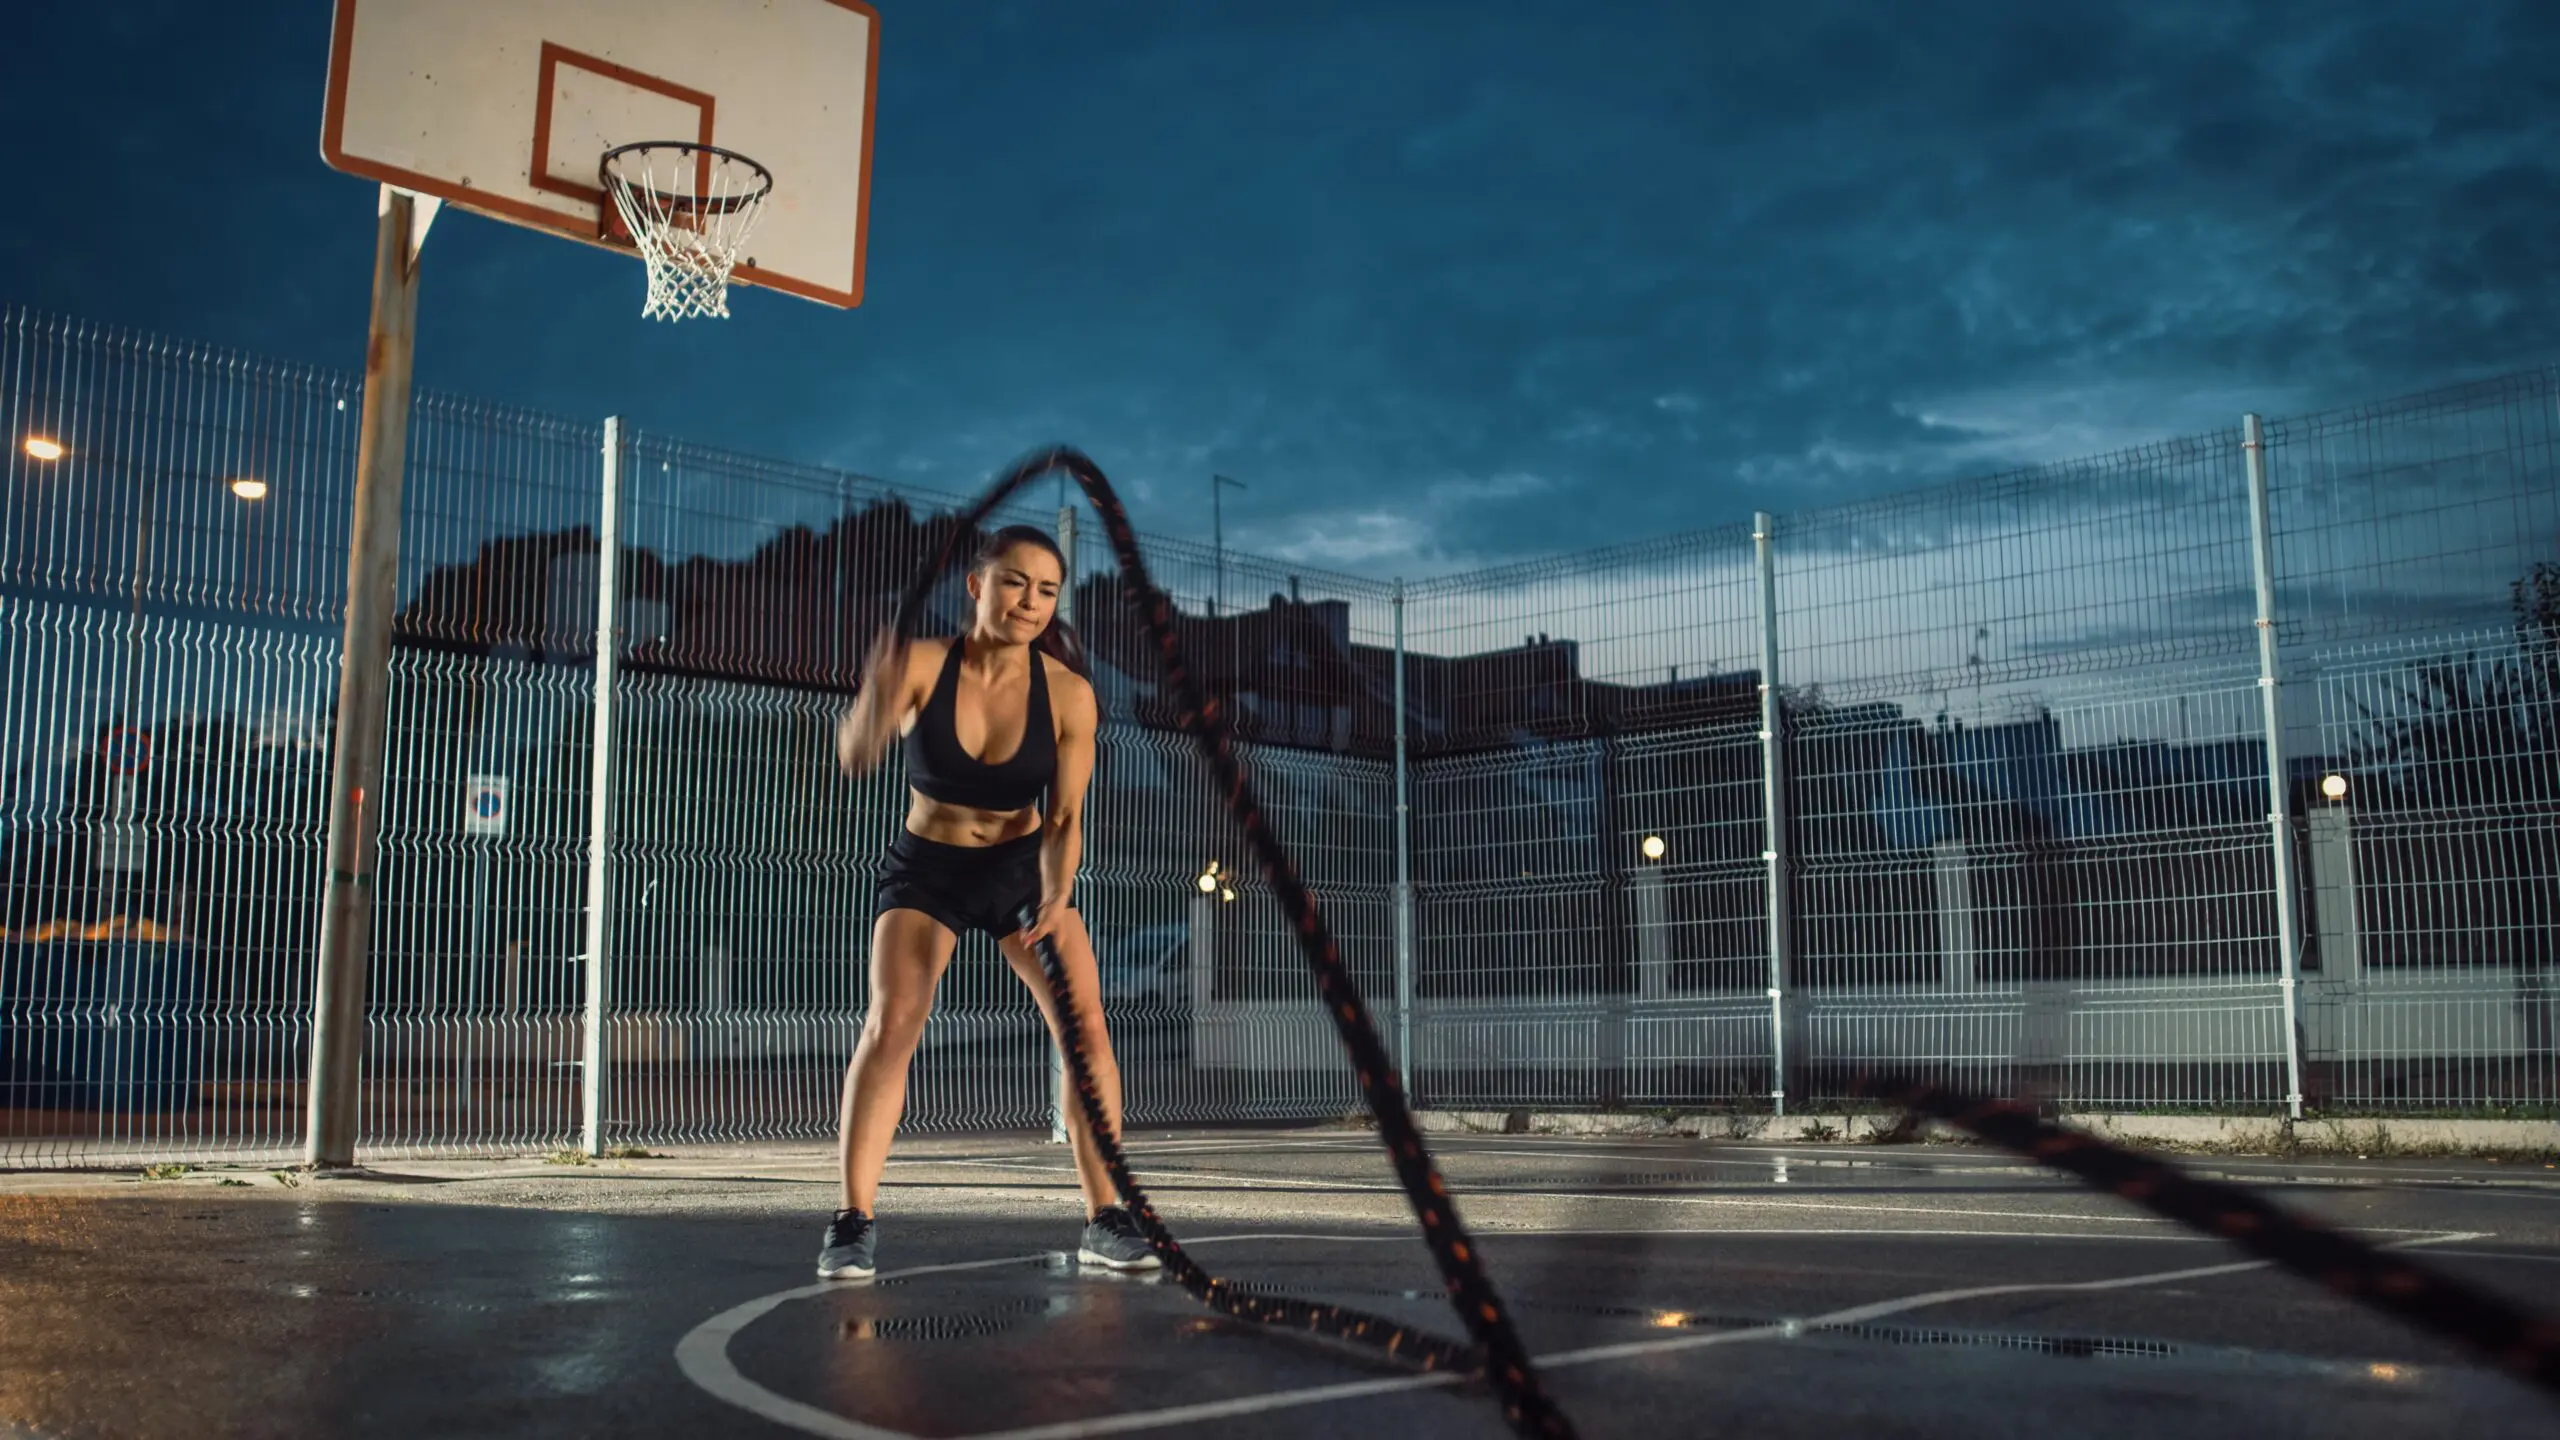 Fit girl using battle ropes on basketball court scaled